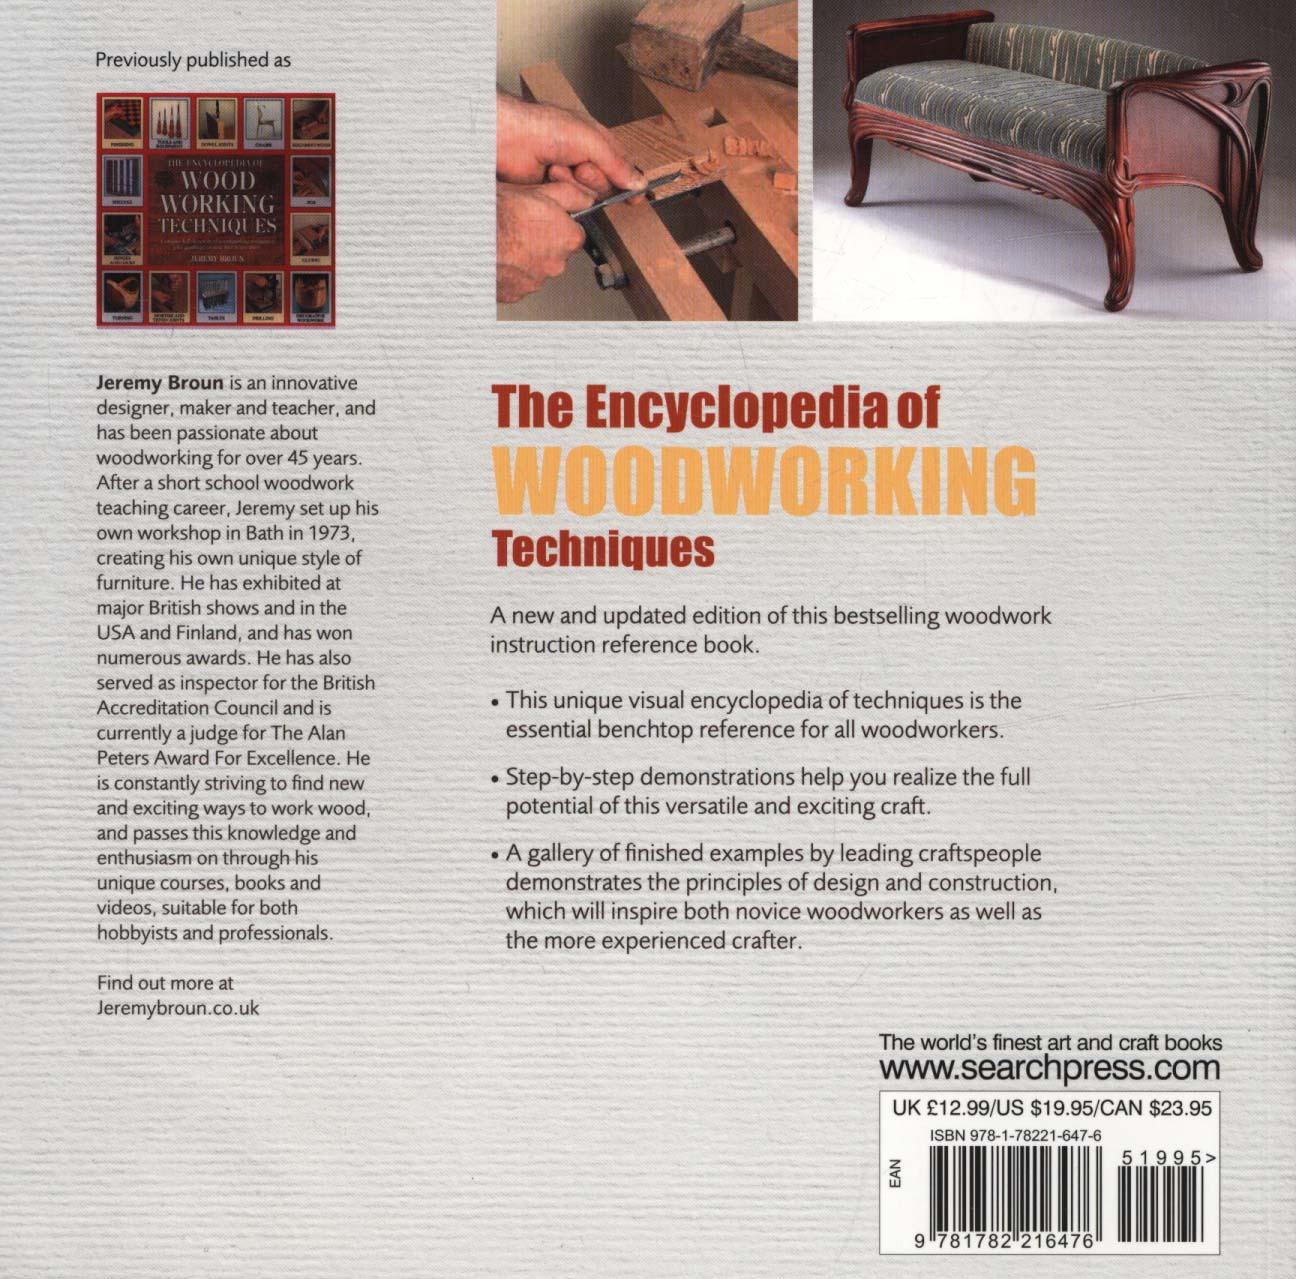 Encyclopedia of Woodworking Techniques